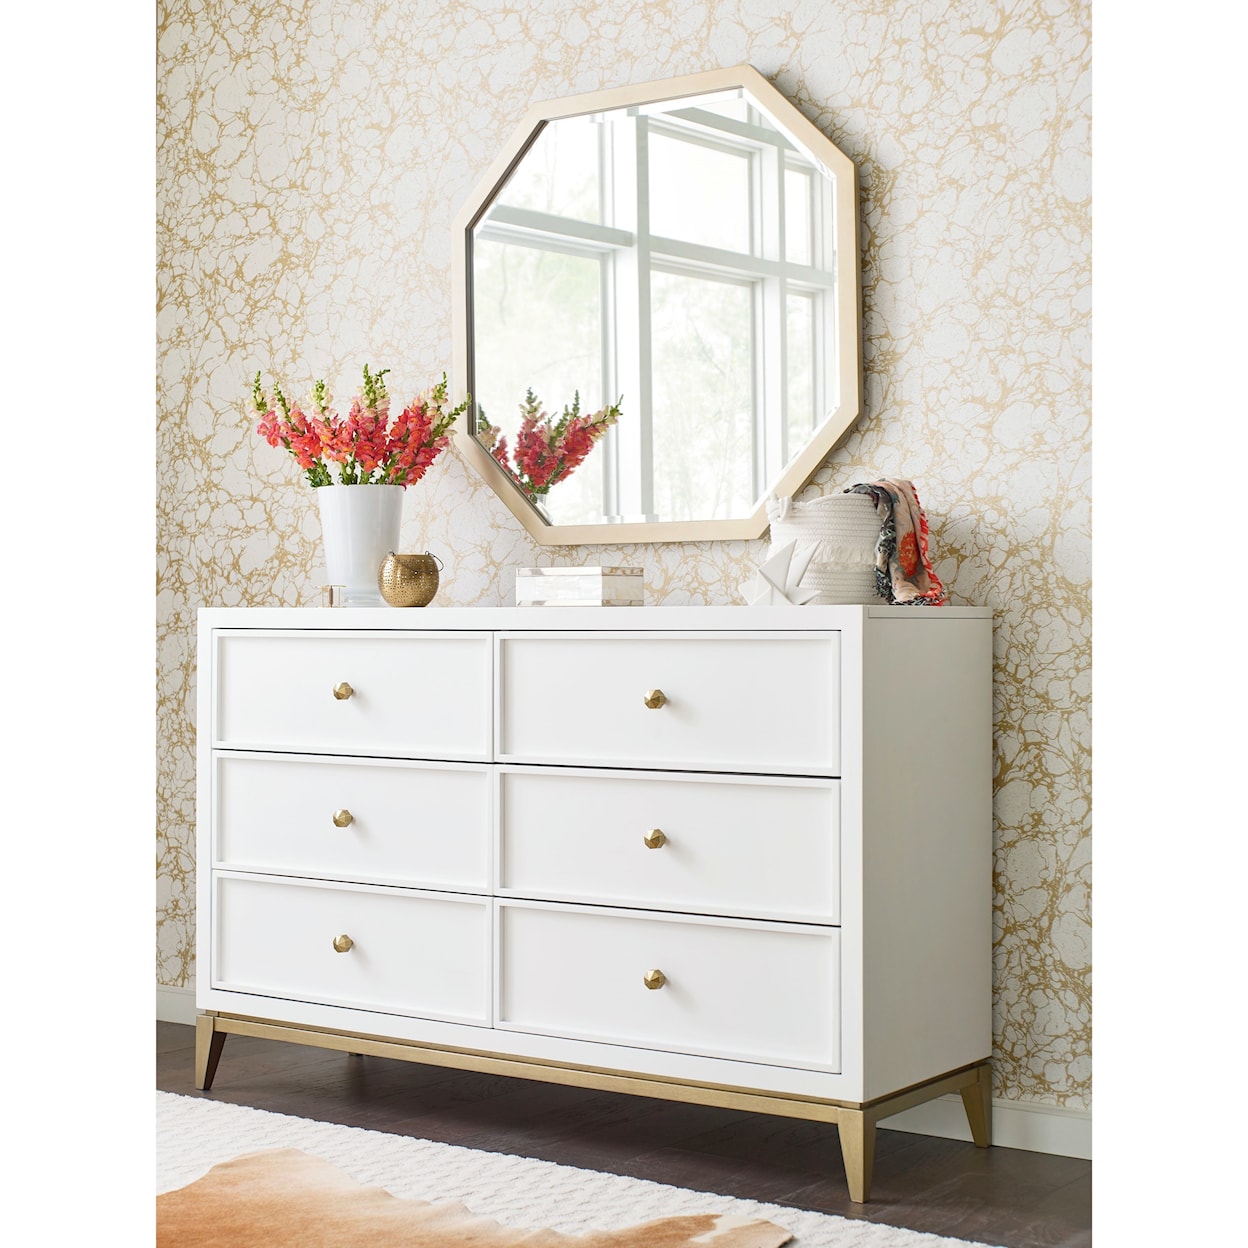 Rachael Ray Home Chelsea Youth Dresser and Mirror Set